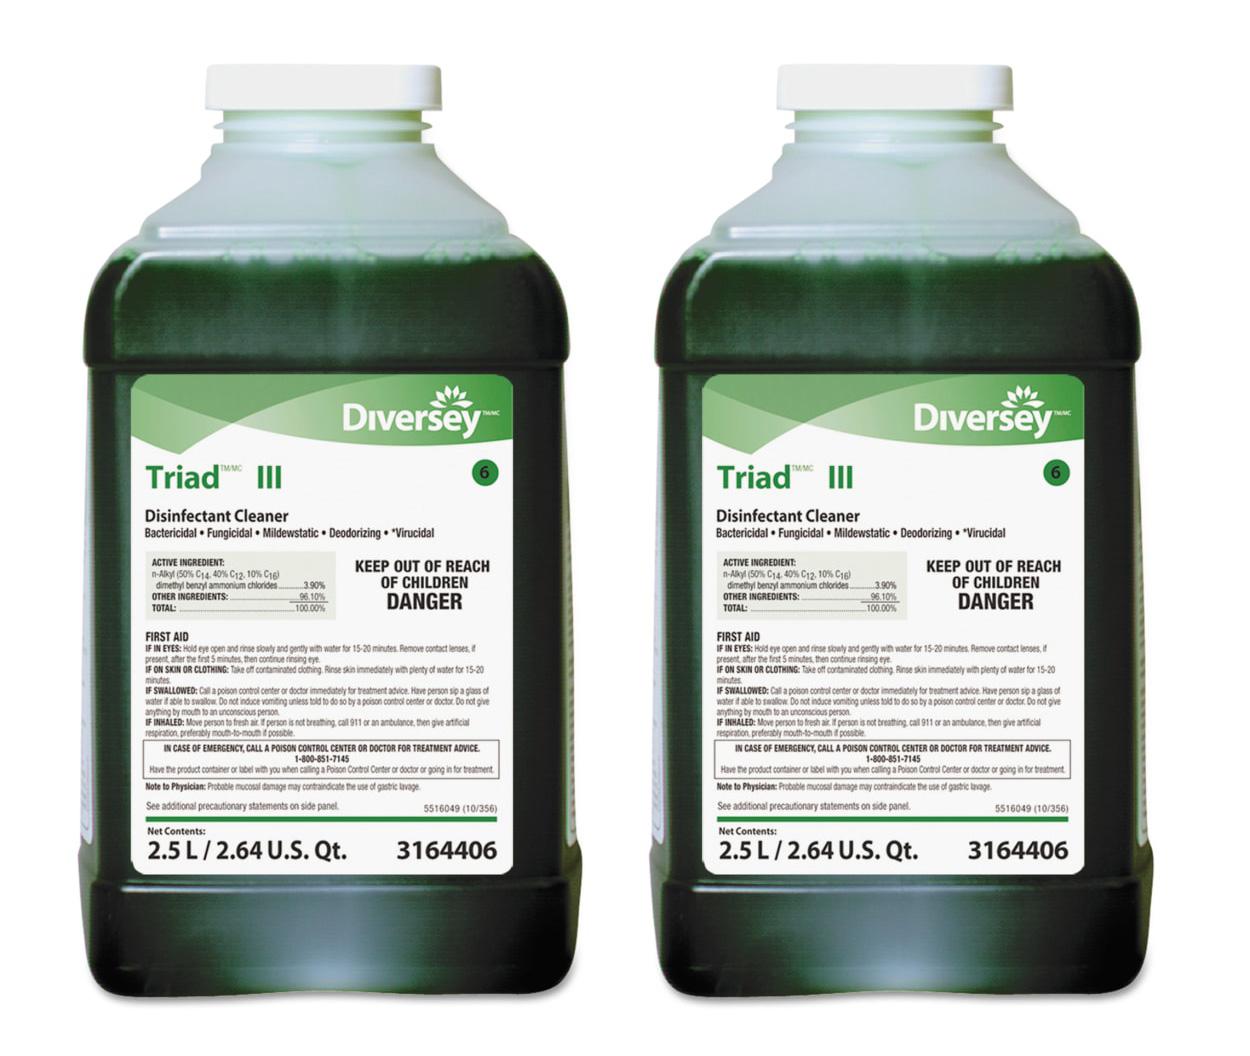 SC Johnson Triad III Disinfectant Cleaner for $11.92 Shipped